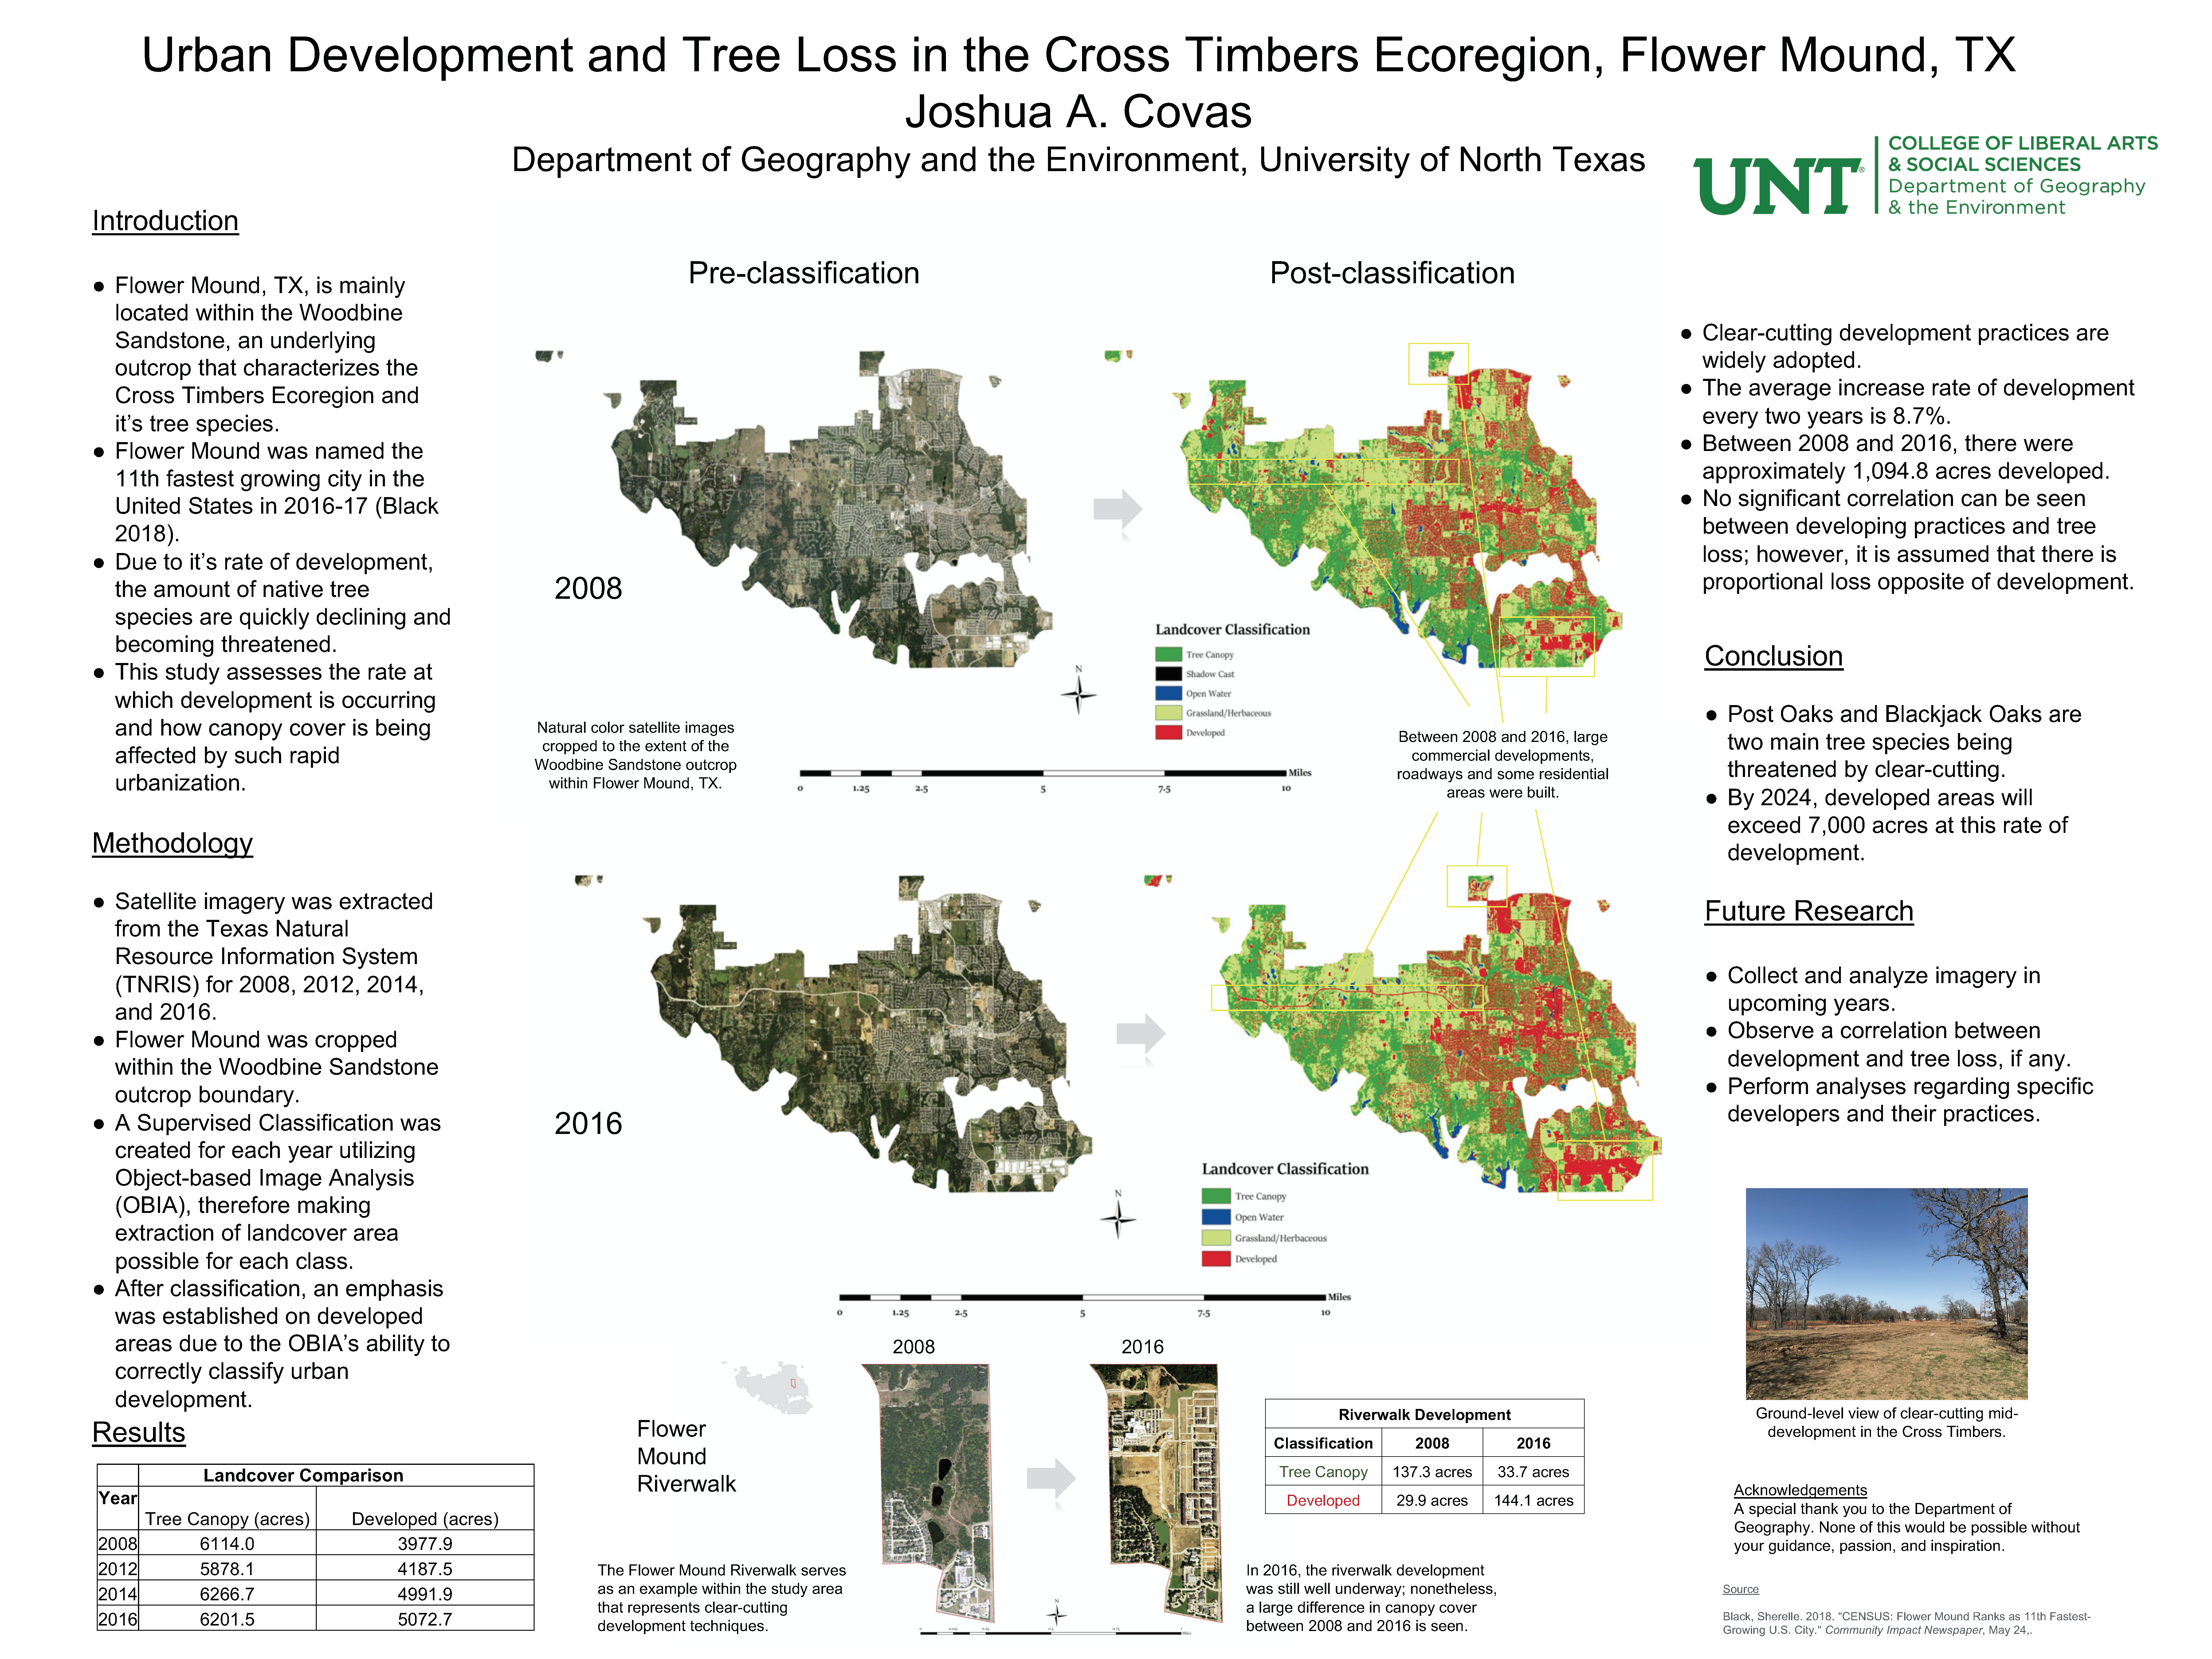 Urban Development and Tree Loss in the Cross Timbers Ecoregion, Flower Mound, TX